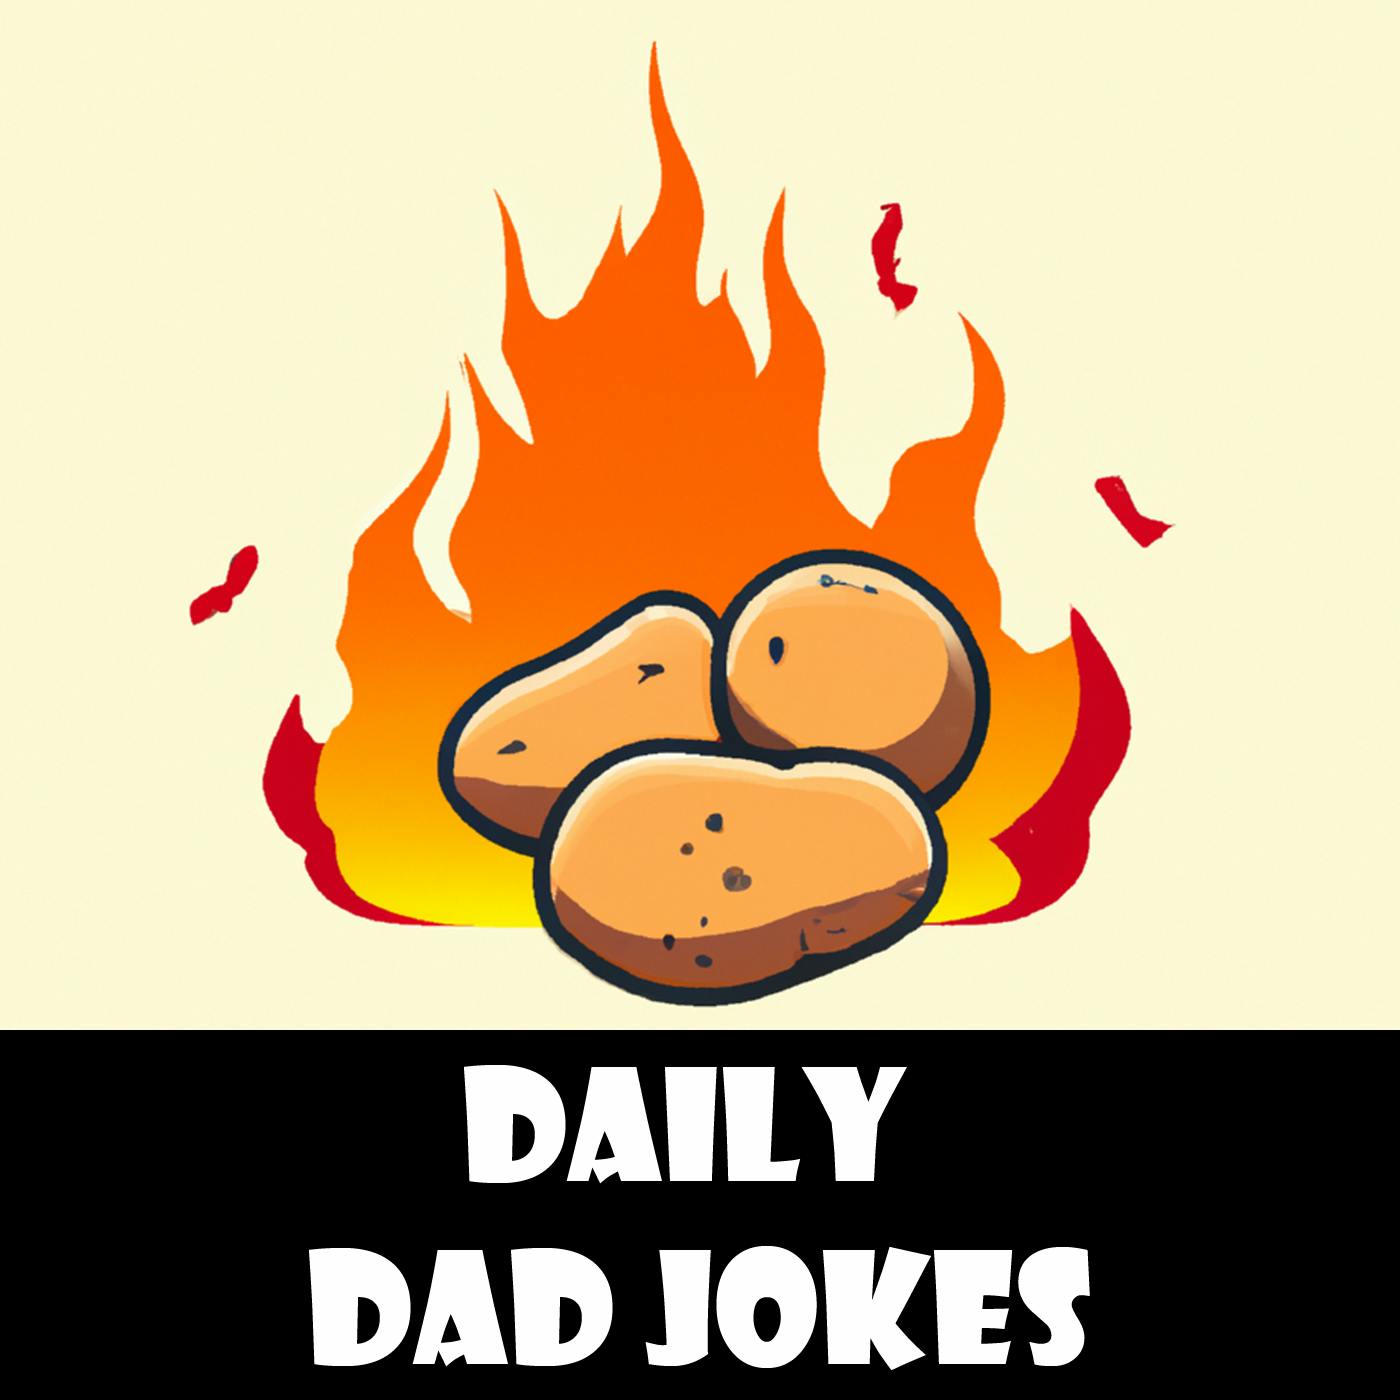 My wife asked me, “Why are all the potatoes burnt to a crisp?” | + 18 more jokes | 26 Nov 2022